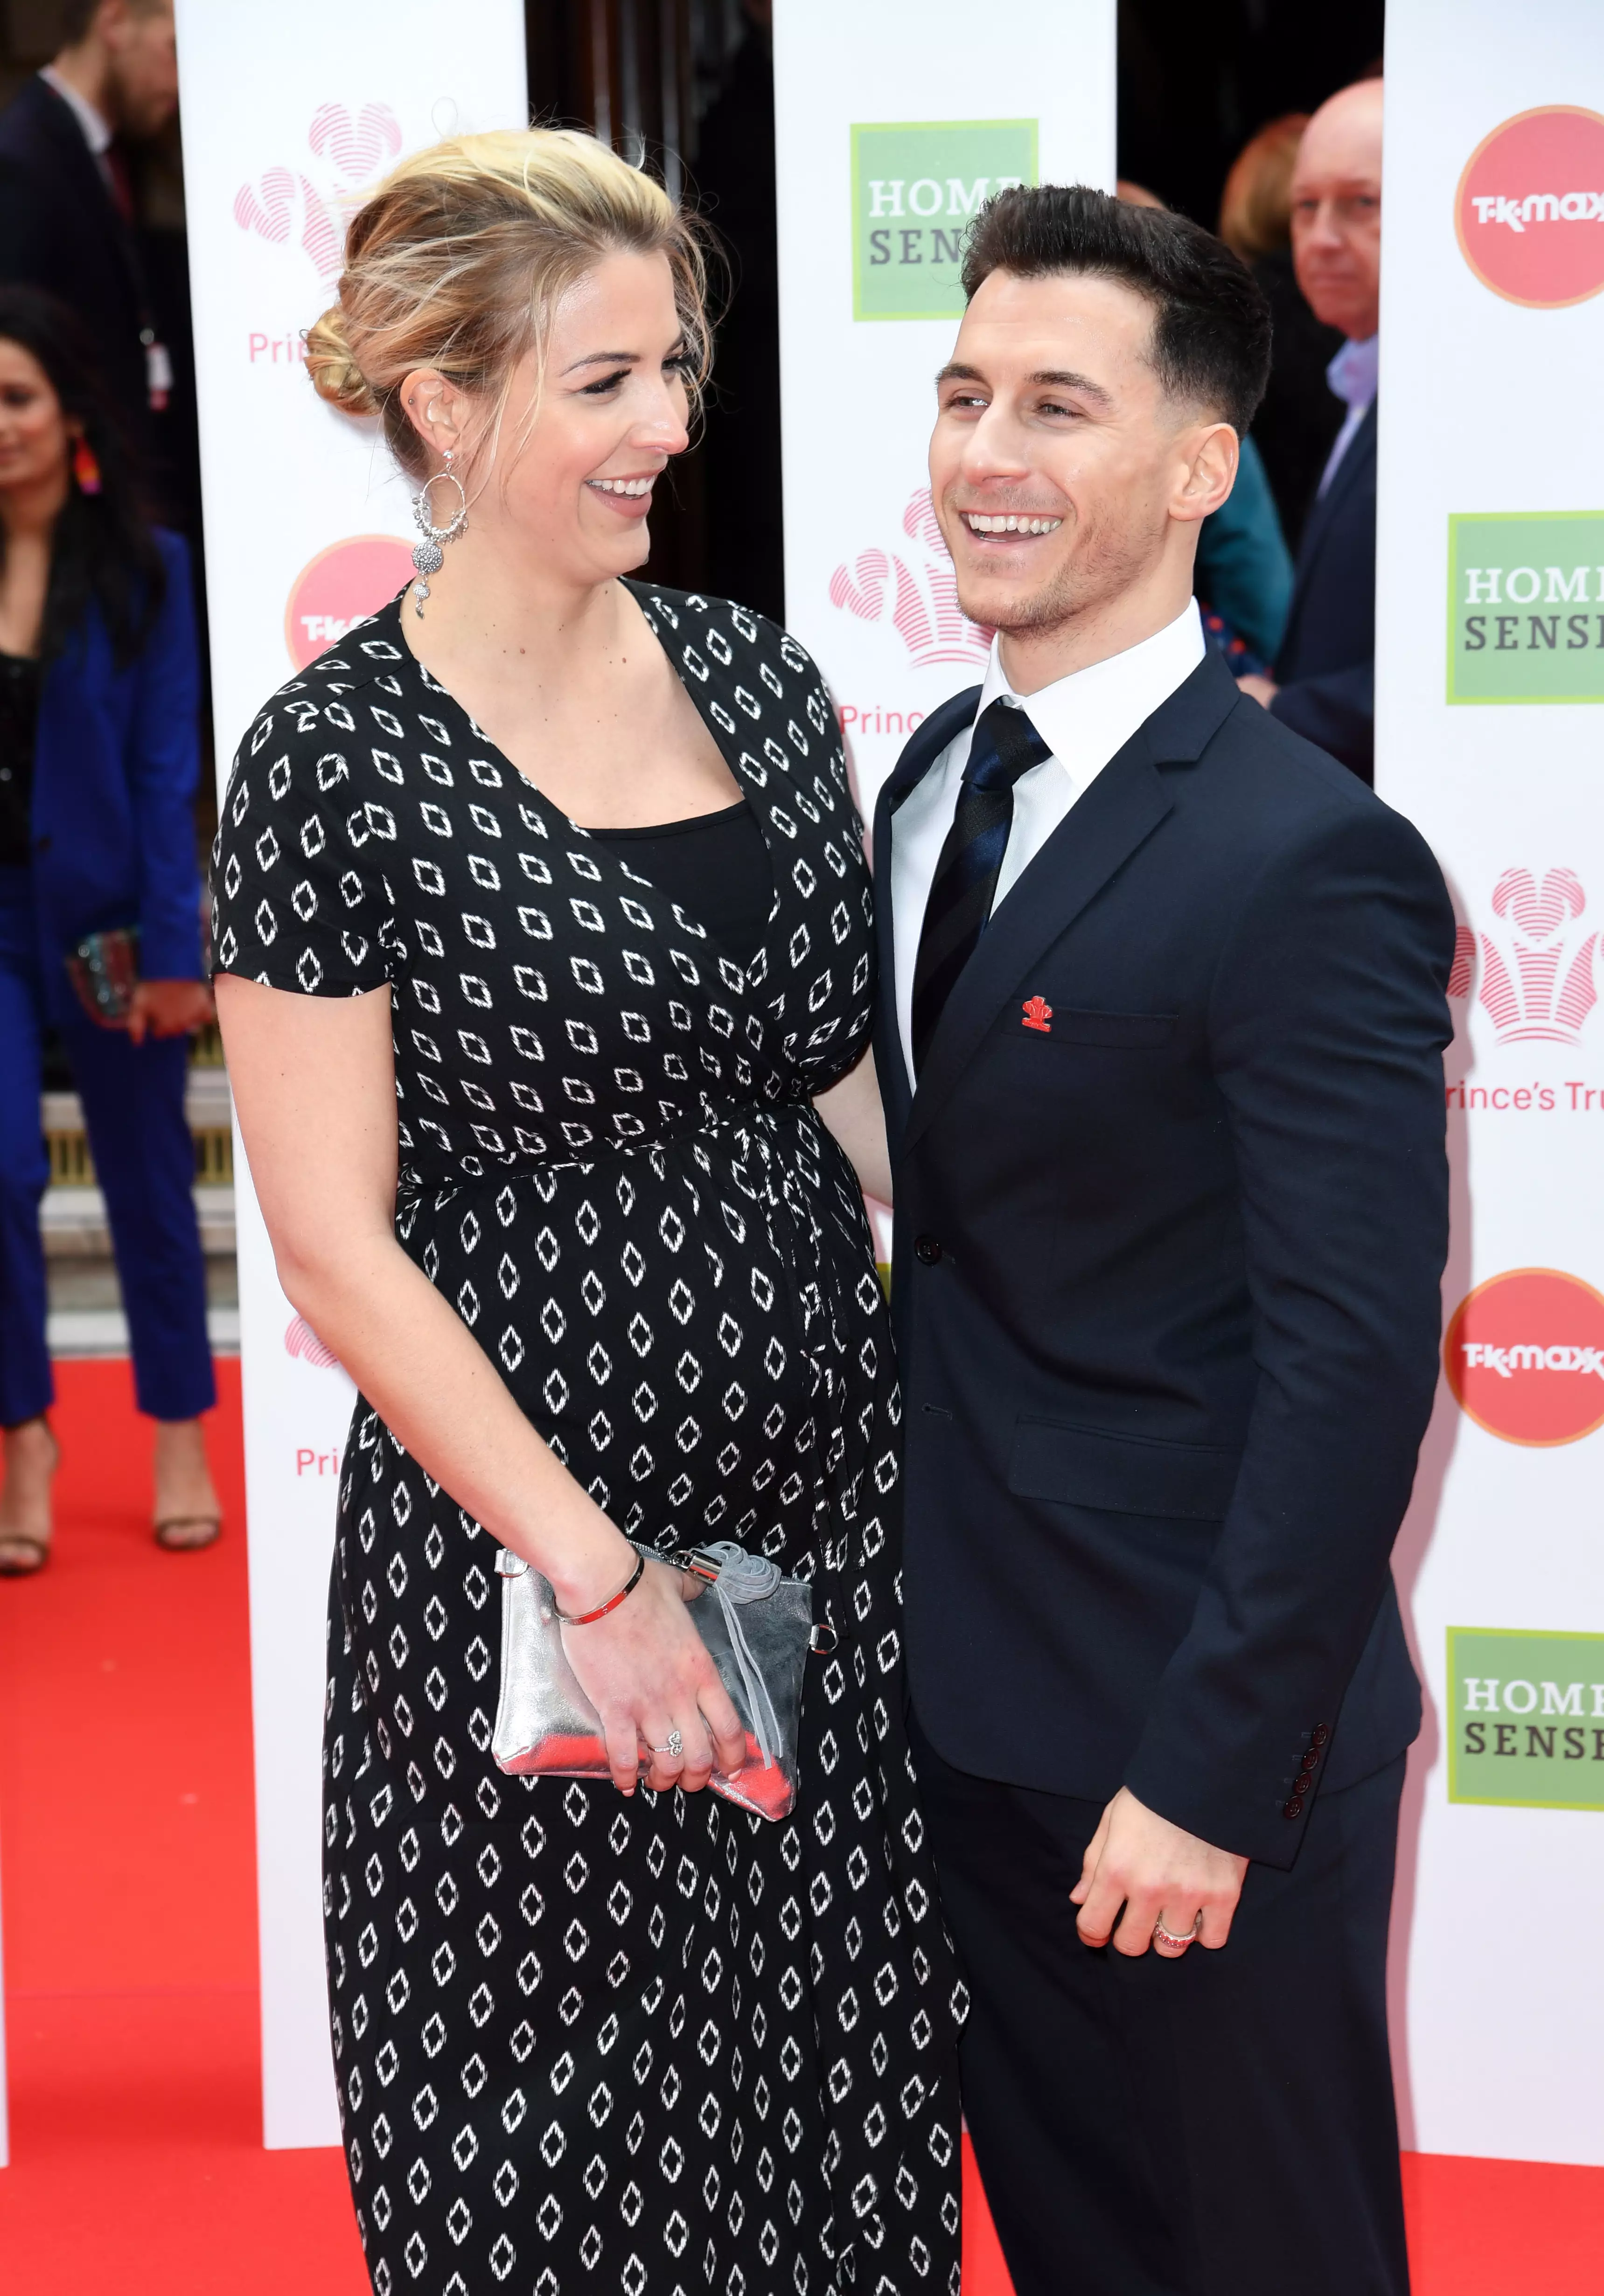 Gorka Marquez and Gemma Atkinson shared the struggles they went through during Gemma's difficult pregnancy. (